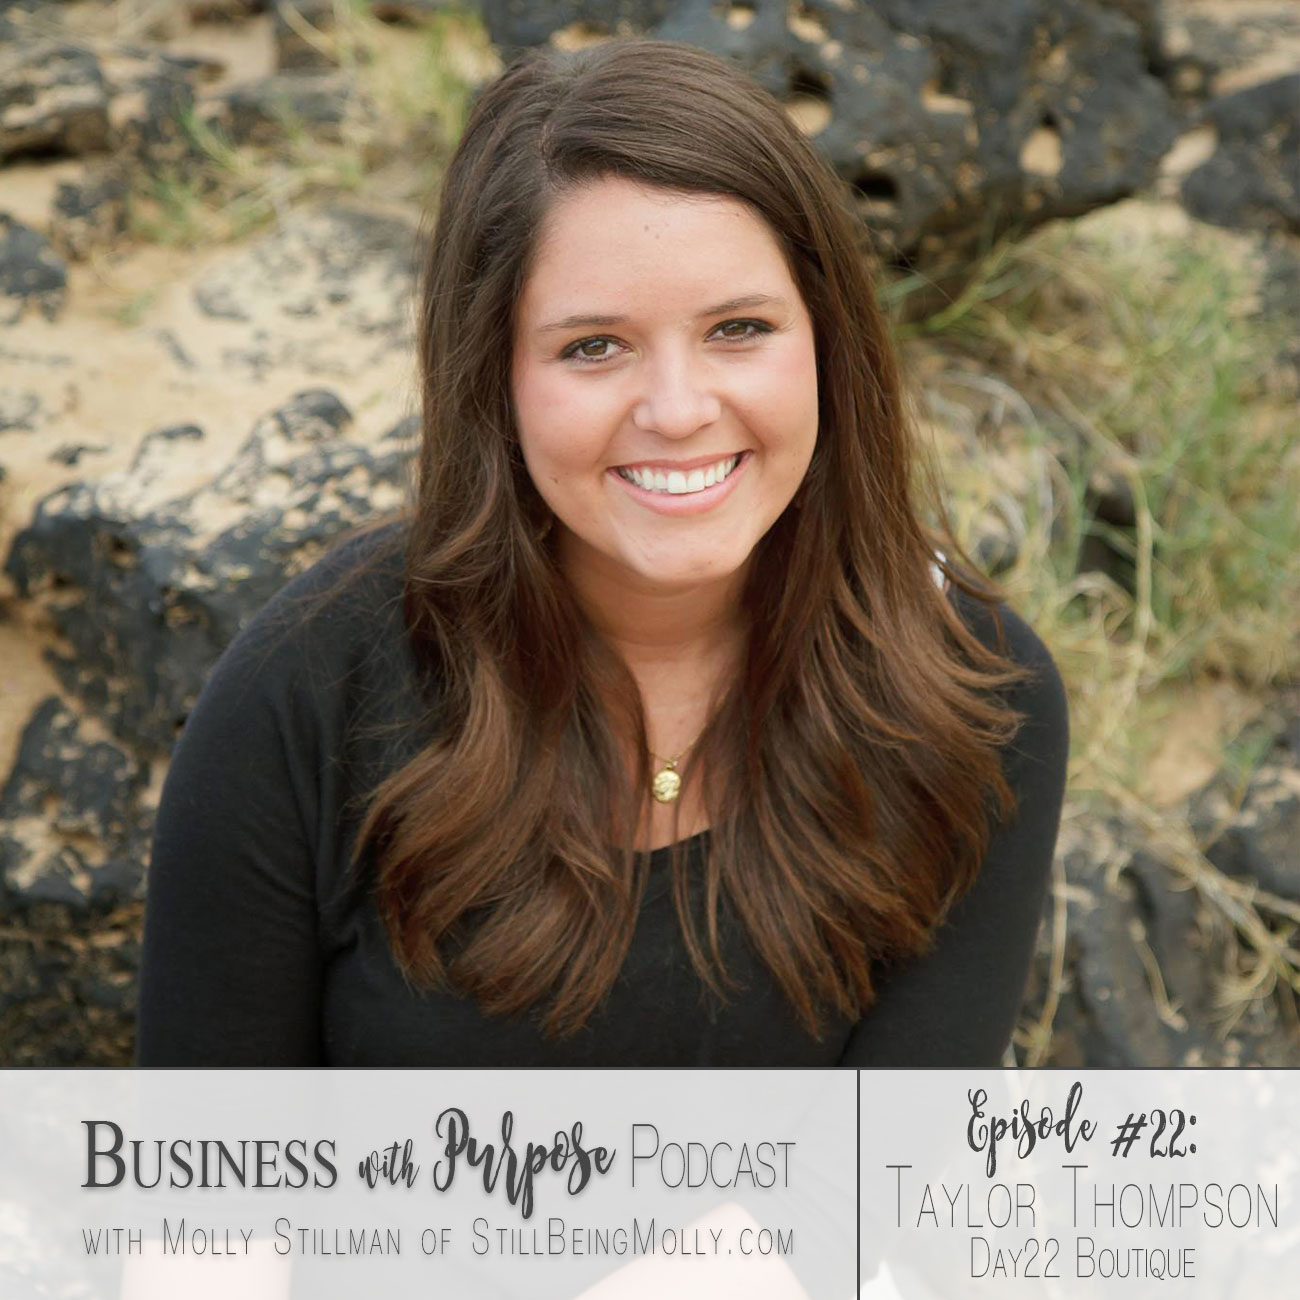 EP. 22: Taylor Thompson - Day22 Boutique + A Kind Journey